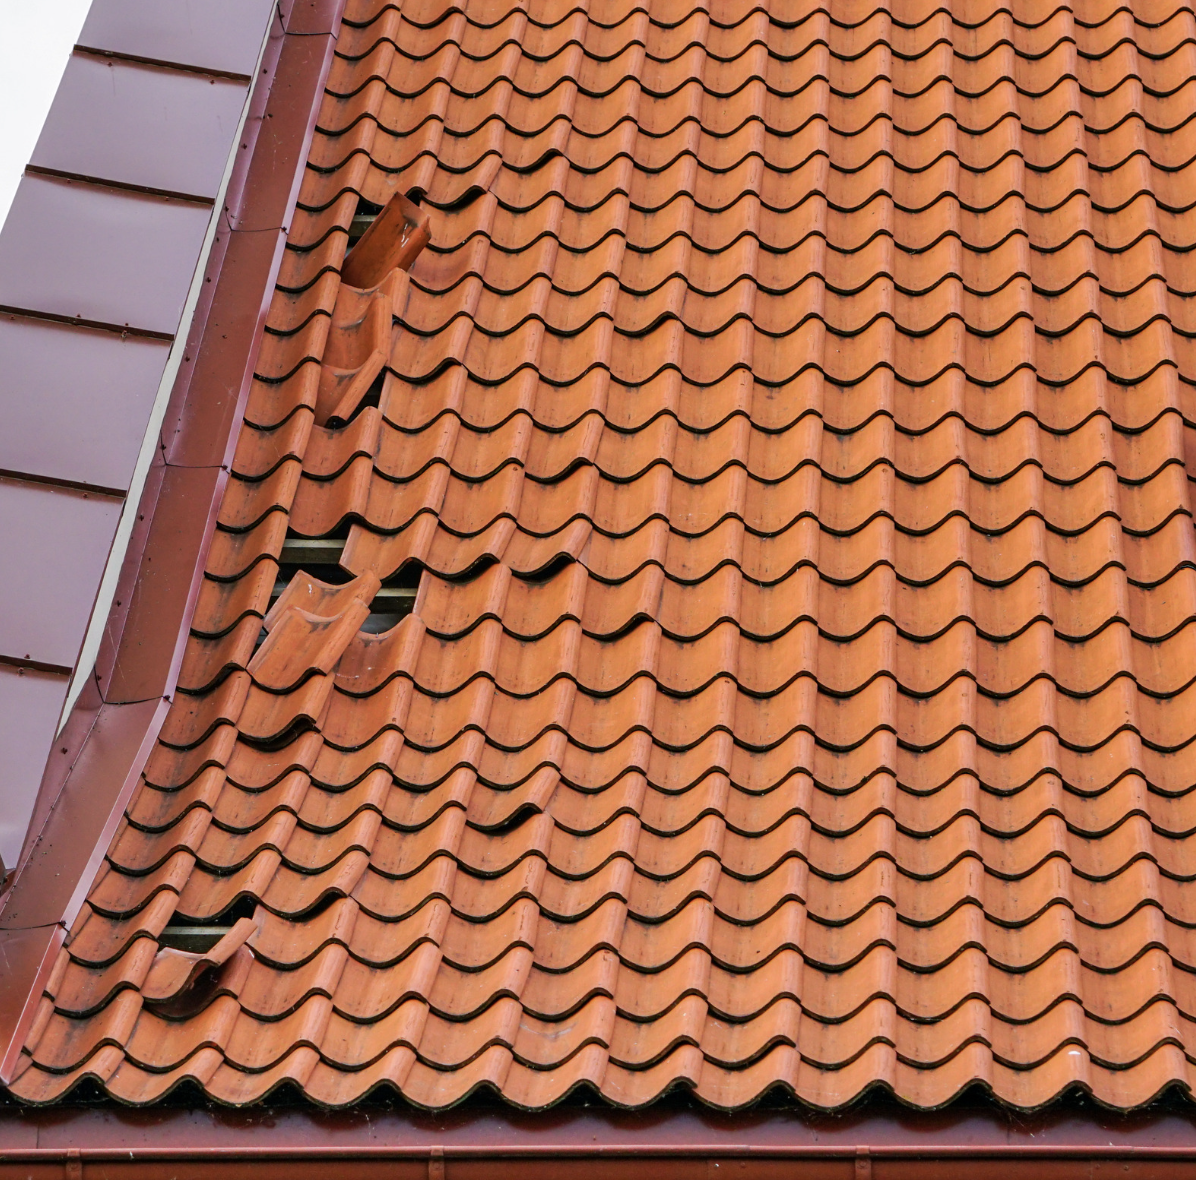 The Good and Bad of Roofing Shingles